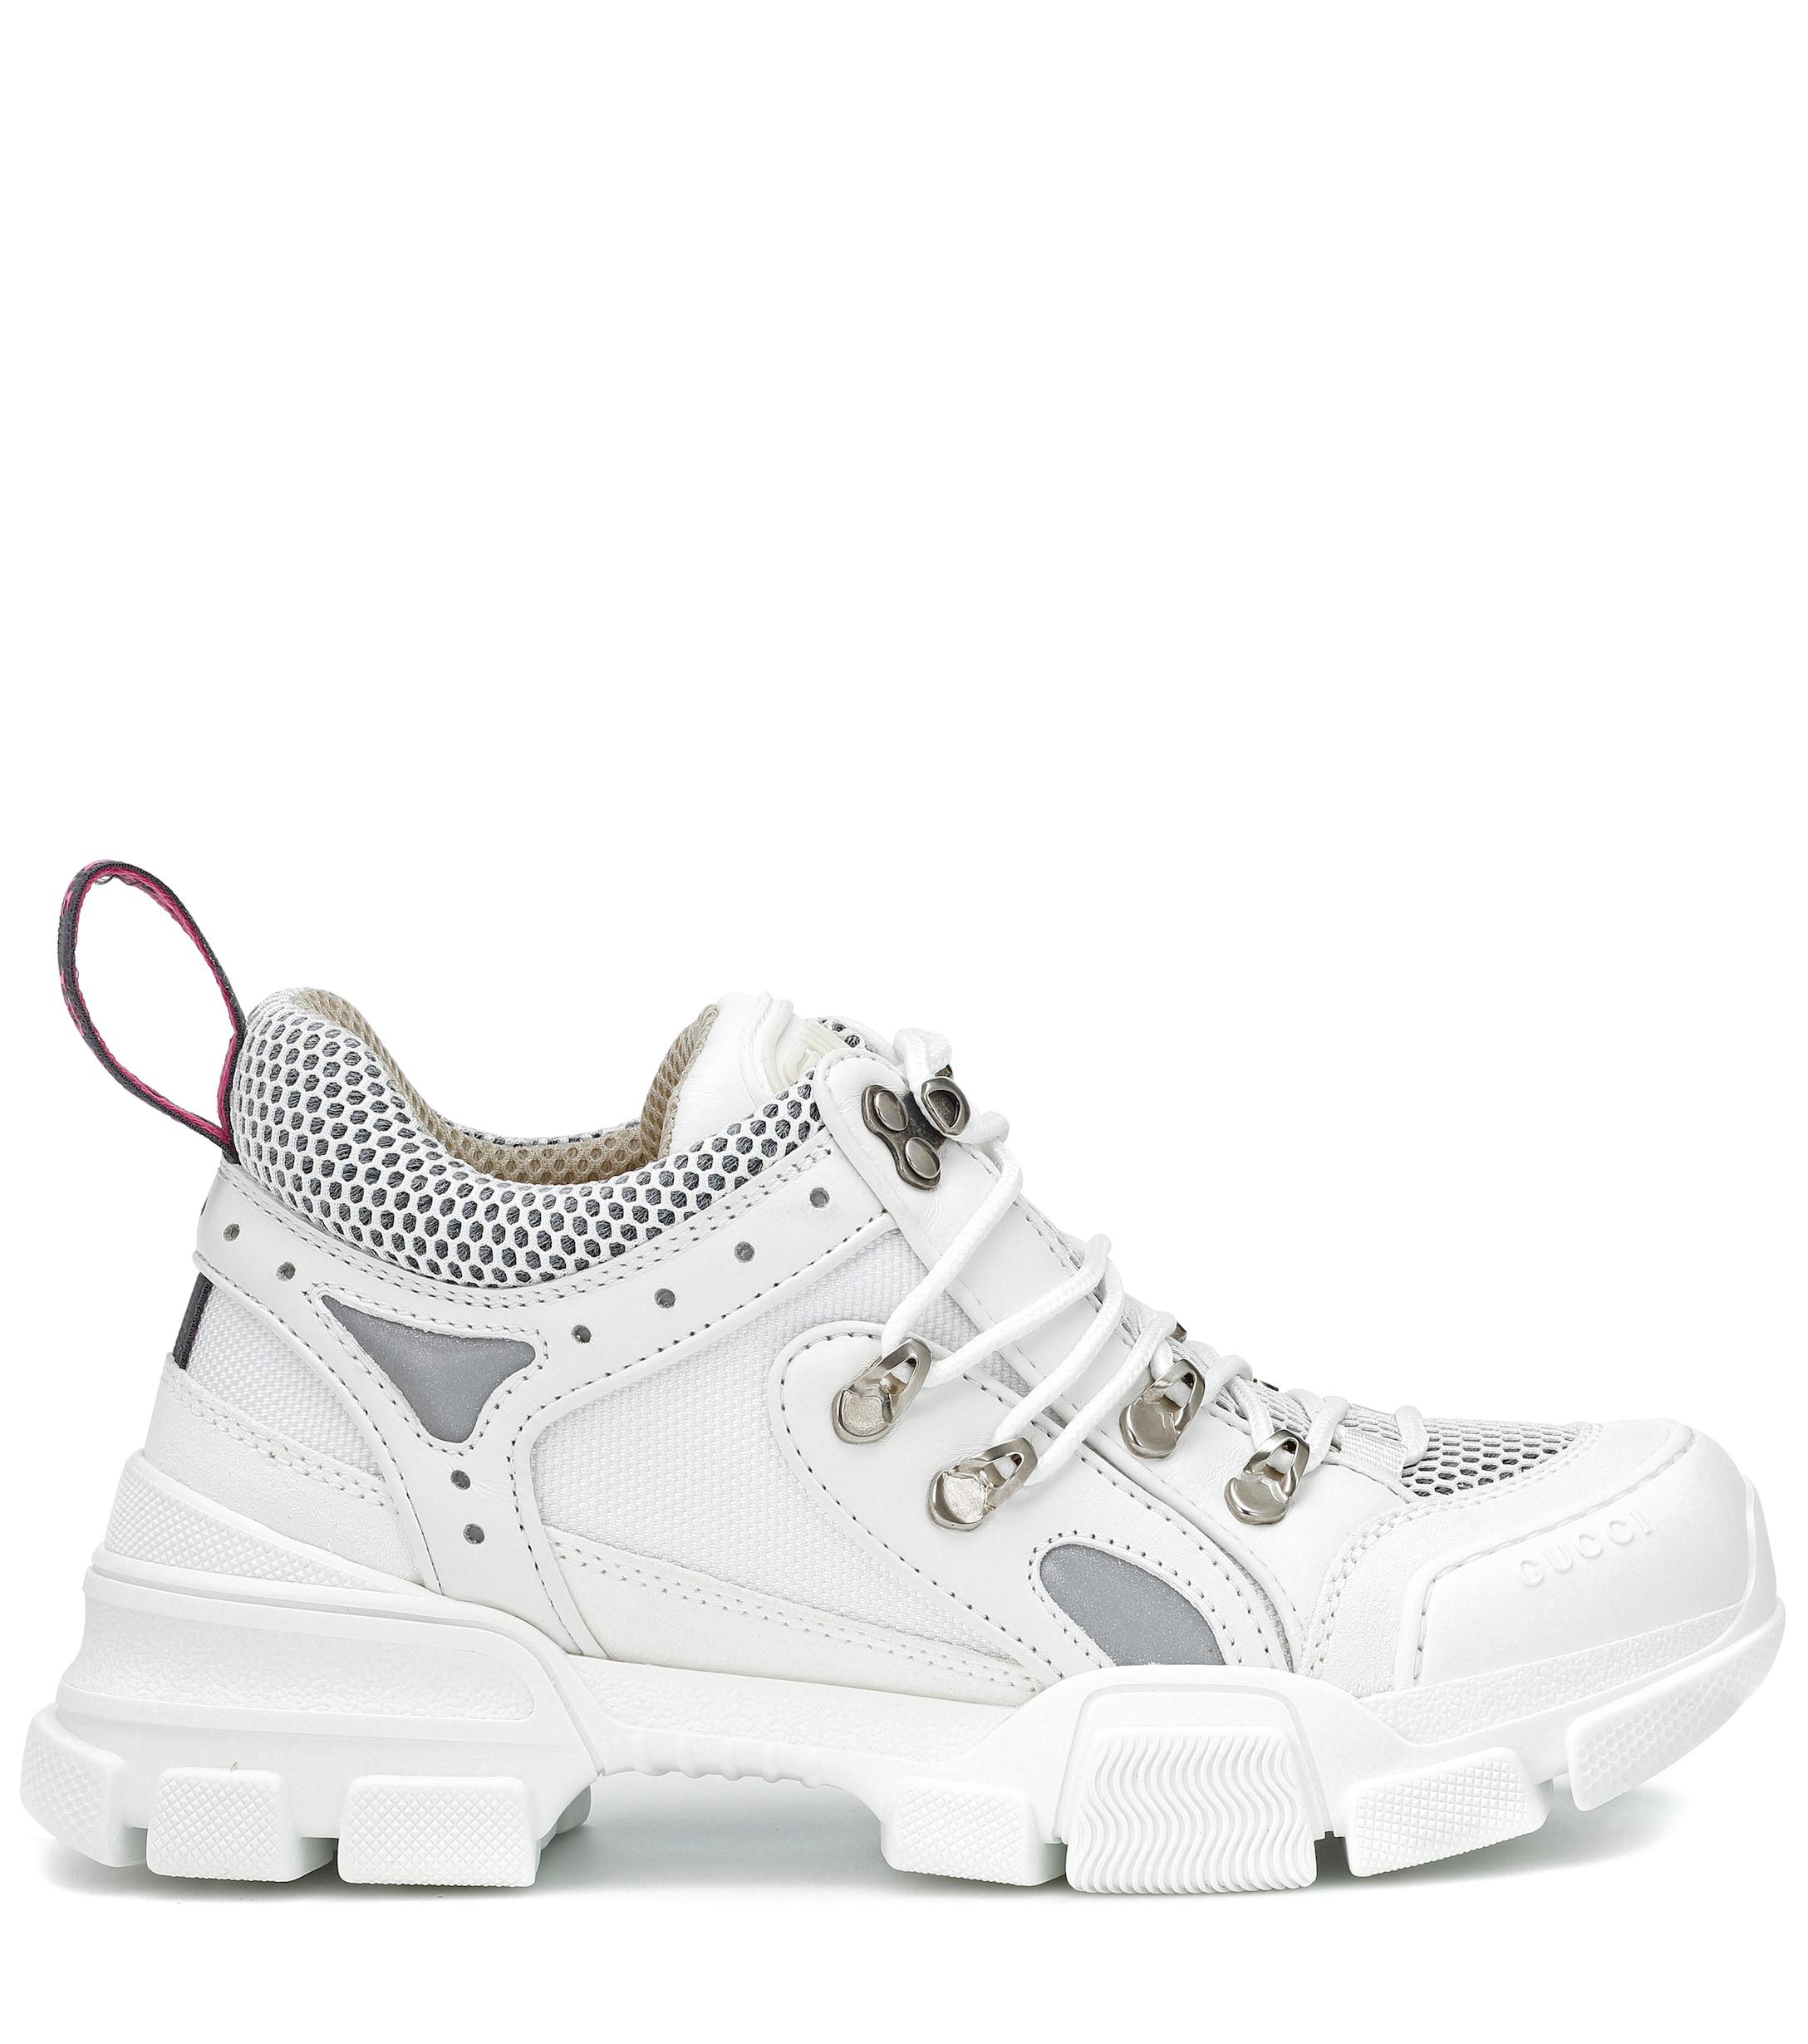 Gucci Flashtrek Leather Sneakers in White - Lyst